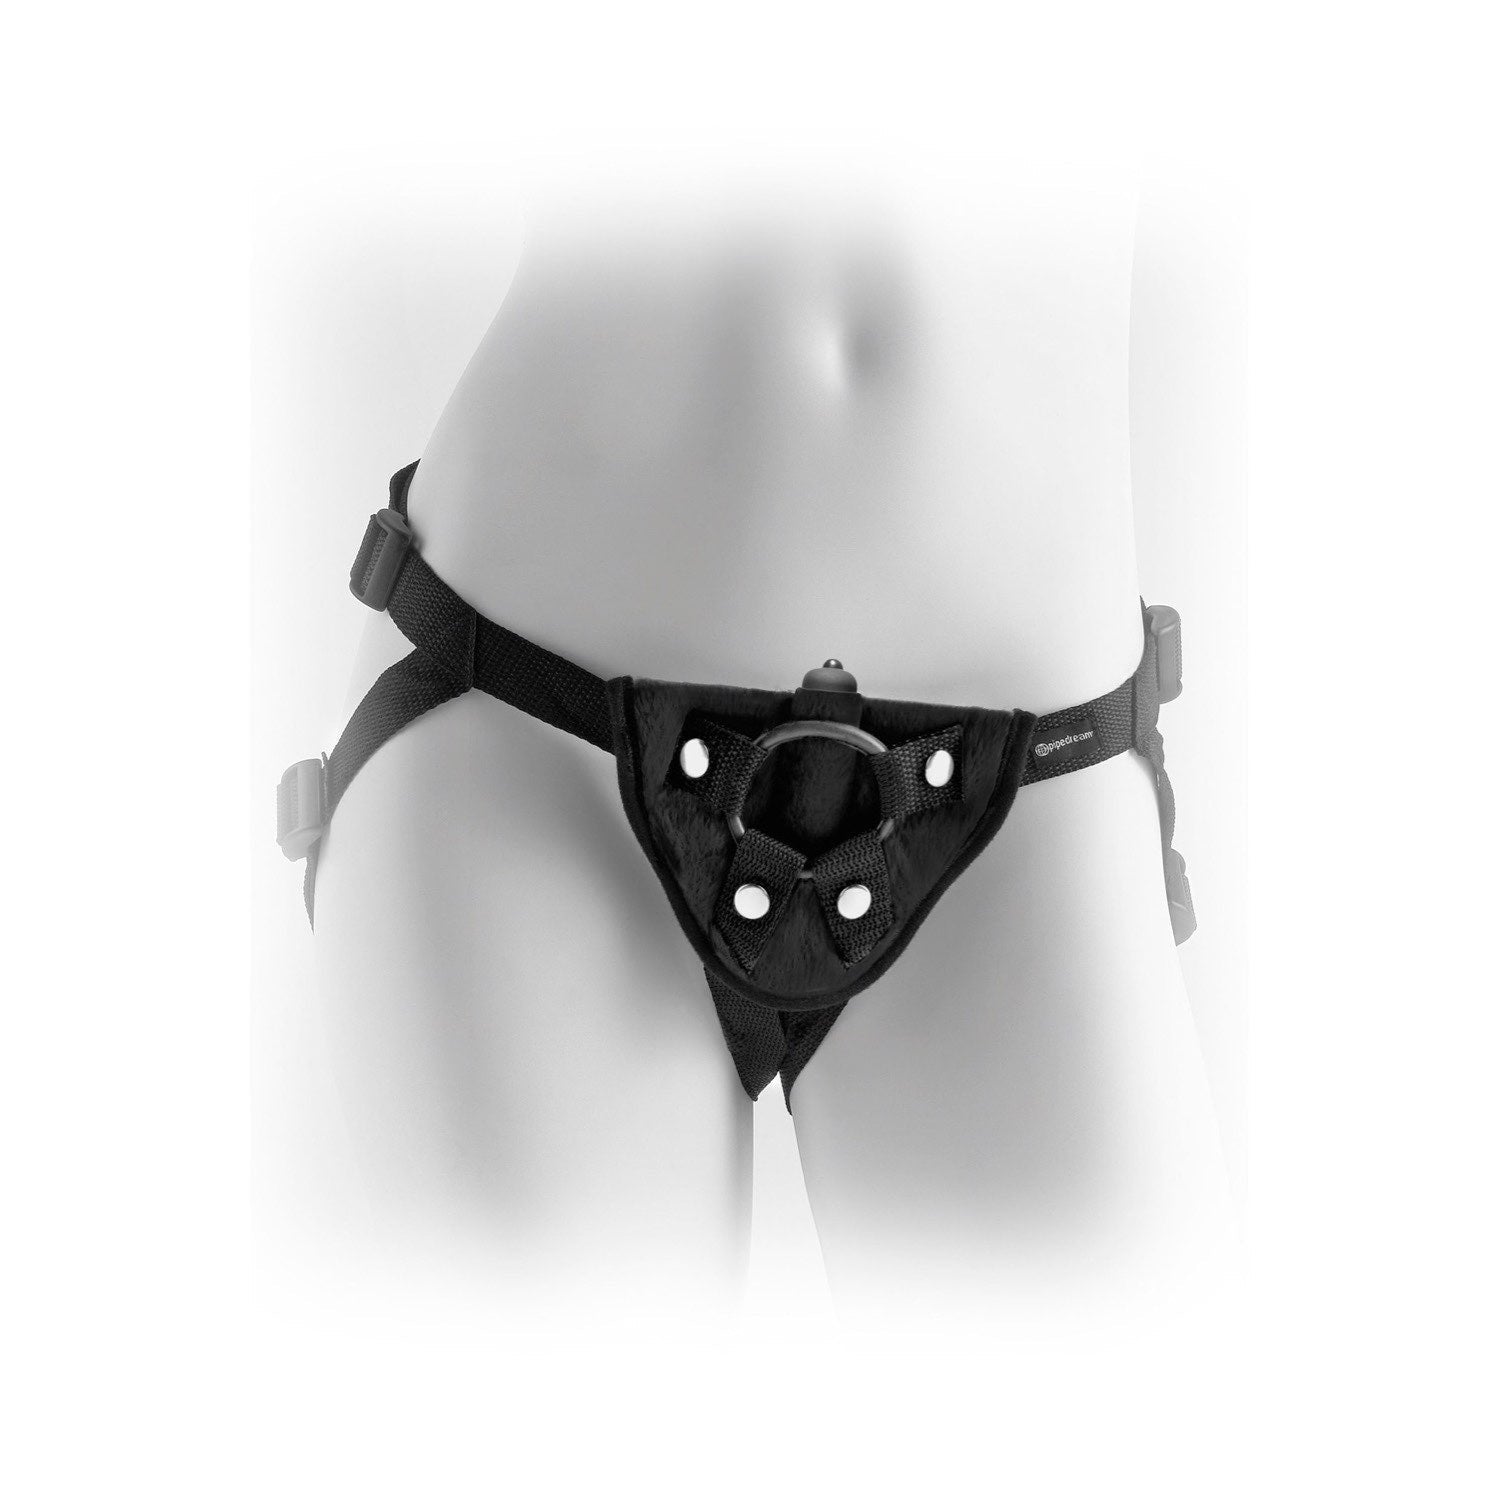 Fetish Fantasy Series Vibrating Plush Harness - Black Vibrating Strap-On Harness (No Probe Included) by Pipedream